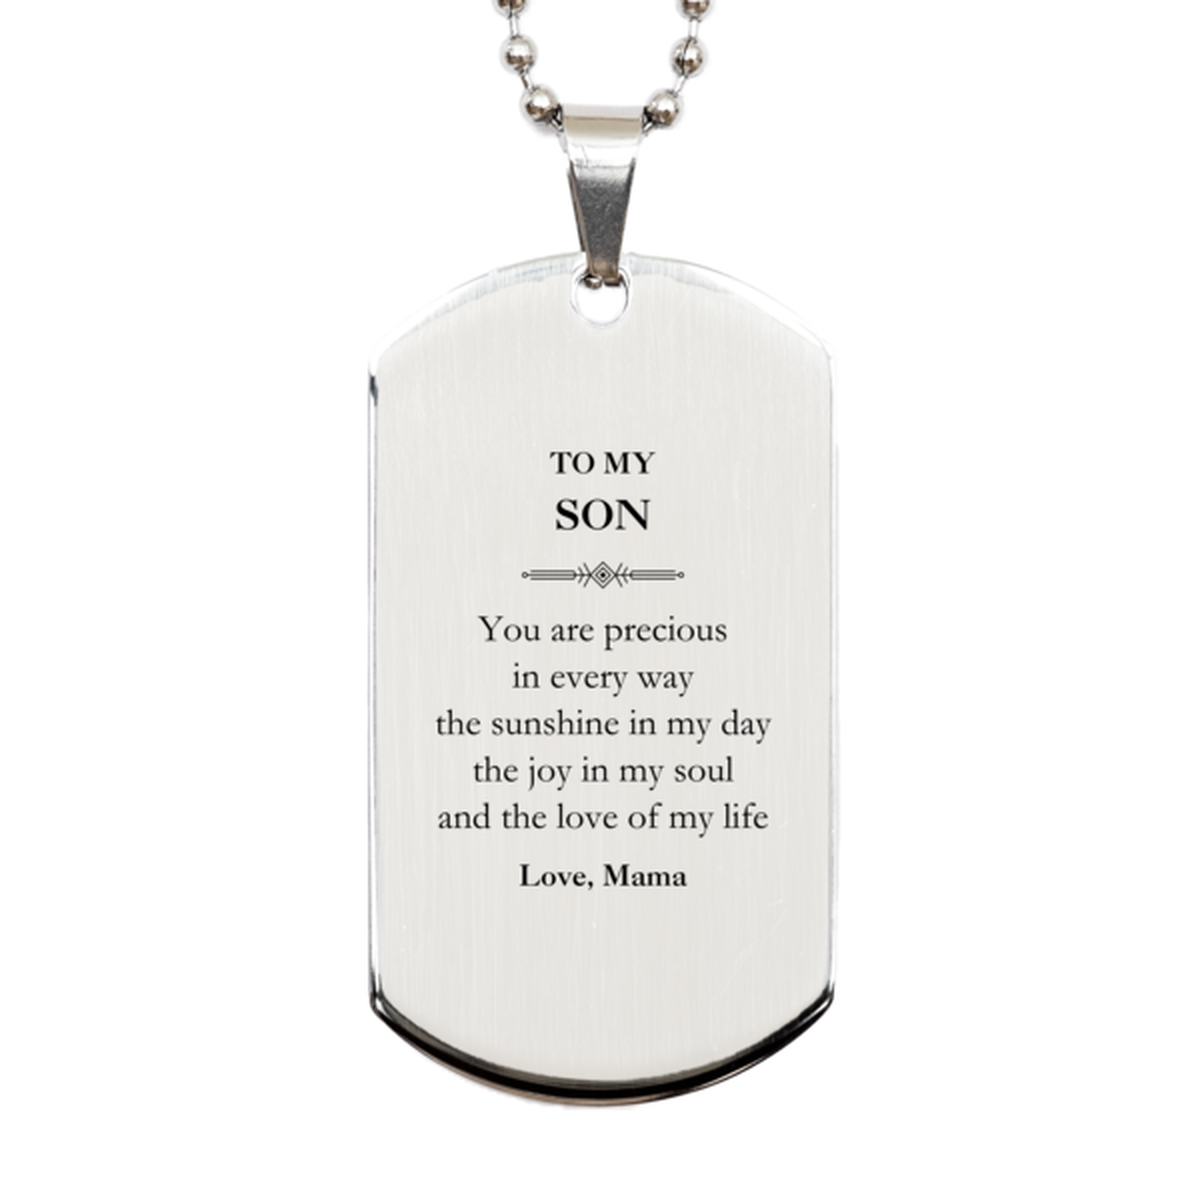 Graduation Gifts for Son Silver Dog Tag Present from Mama, Christmas Son Birthday Gifts Son You are precious in every way the sunshine in my day. Love, Mama